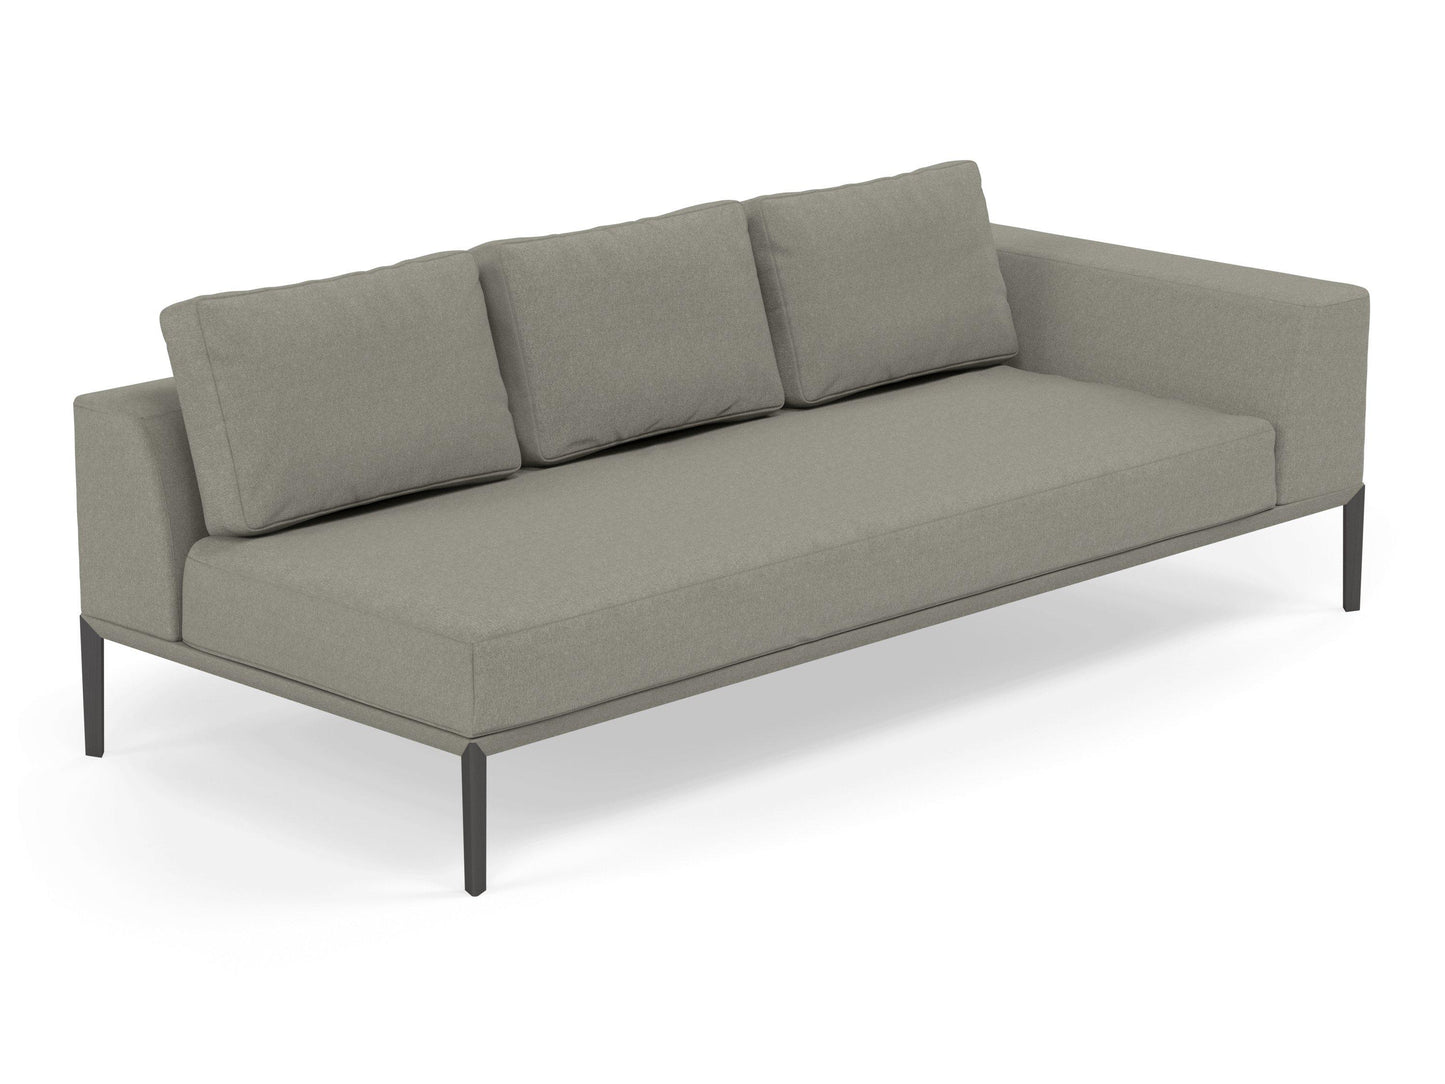 Modern 3 Seater Chaise Lounge Style Sofa with Left Armrest in Silver Grey Fabric-Distinct Designs (London) Ltd